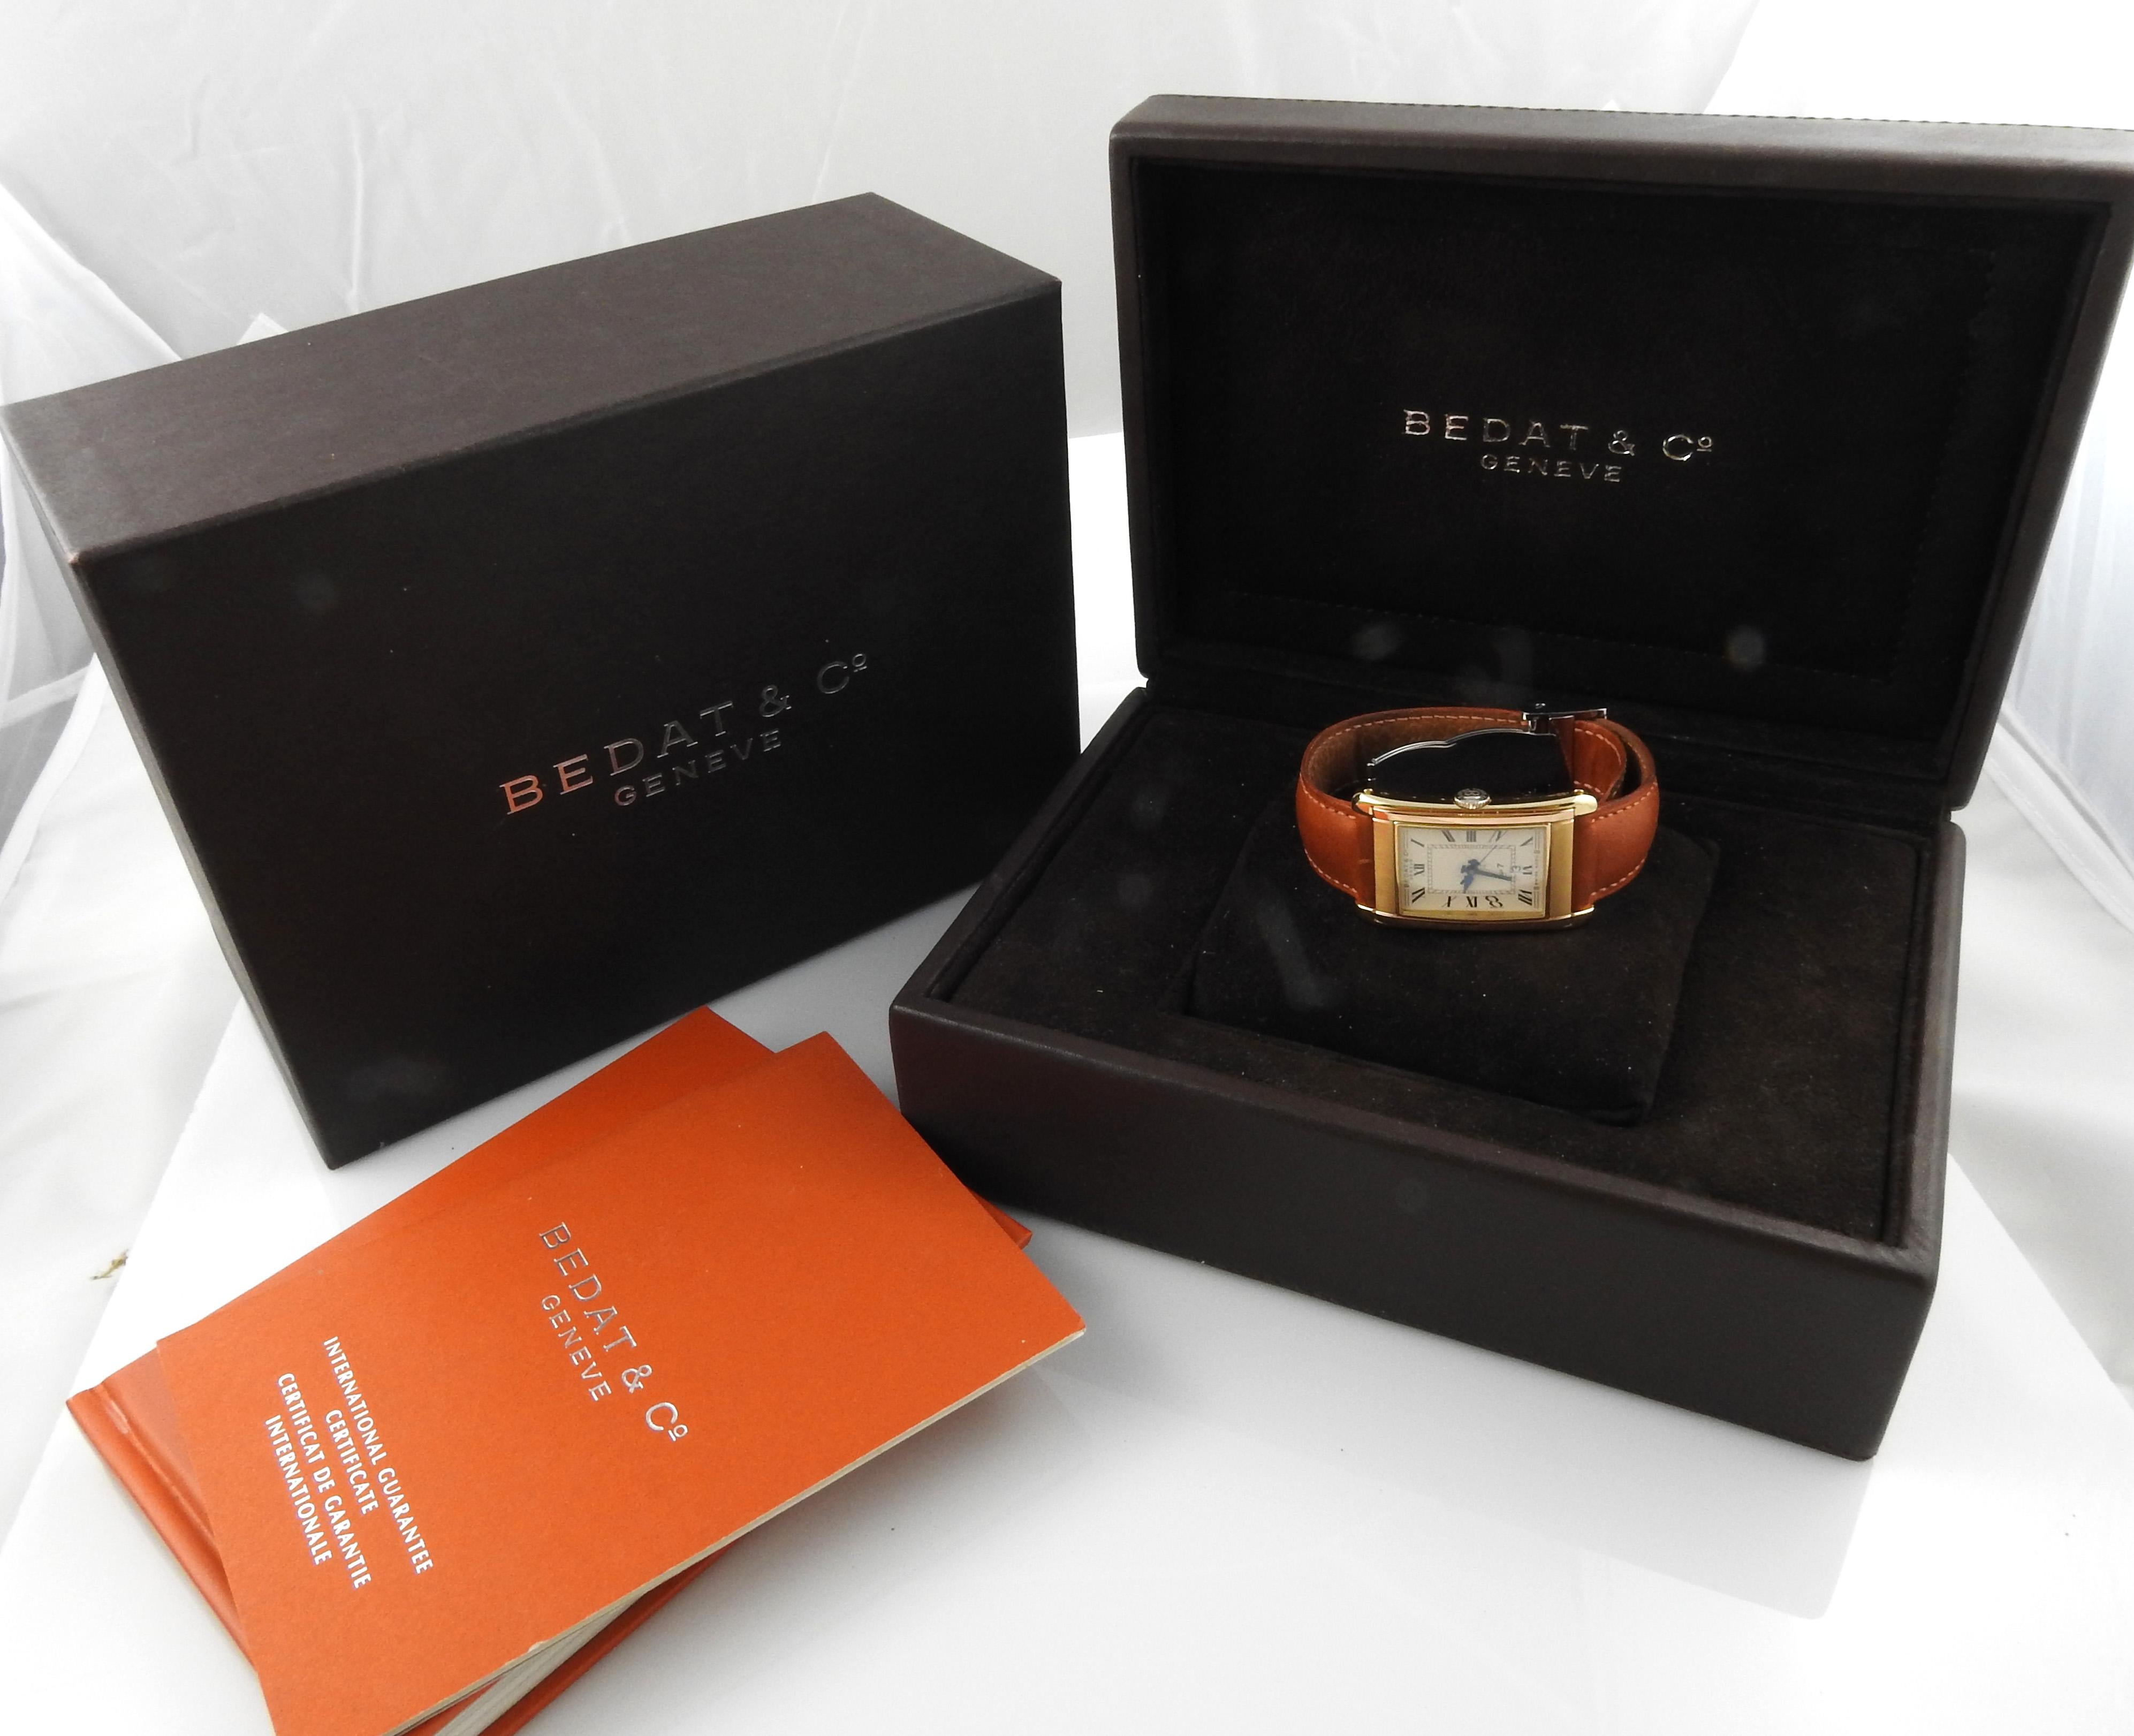 Bedat & Co. No. 7 18 Karat Tri Gold Men's Watch with Box and Papers 7